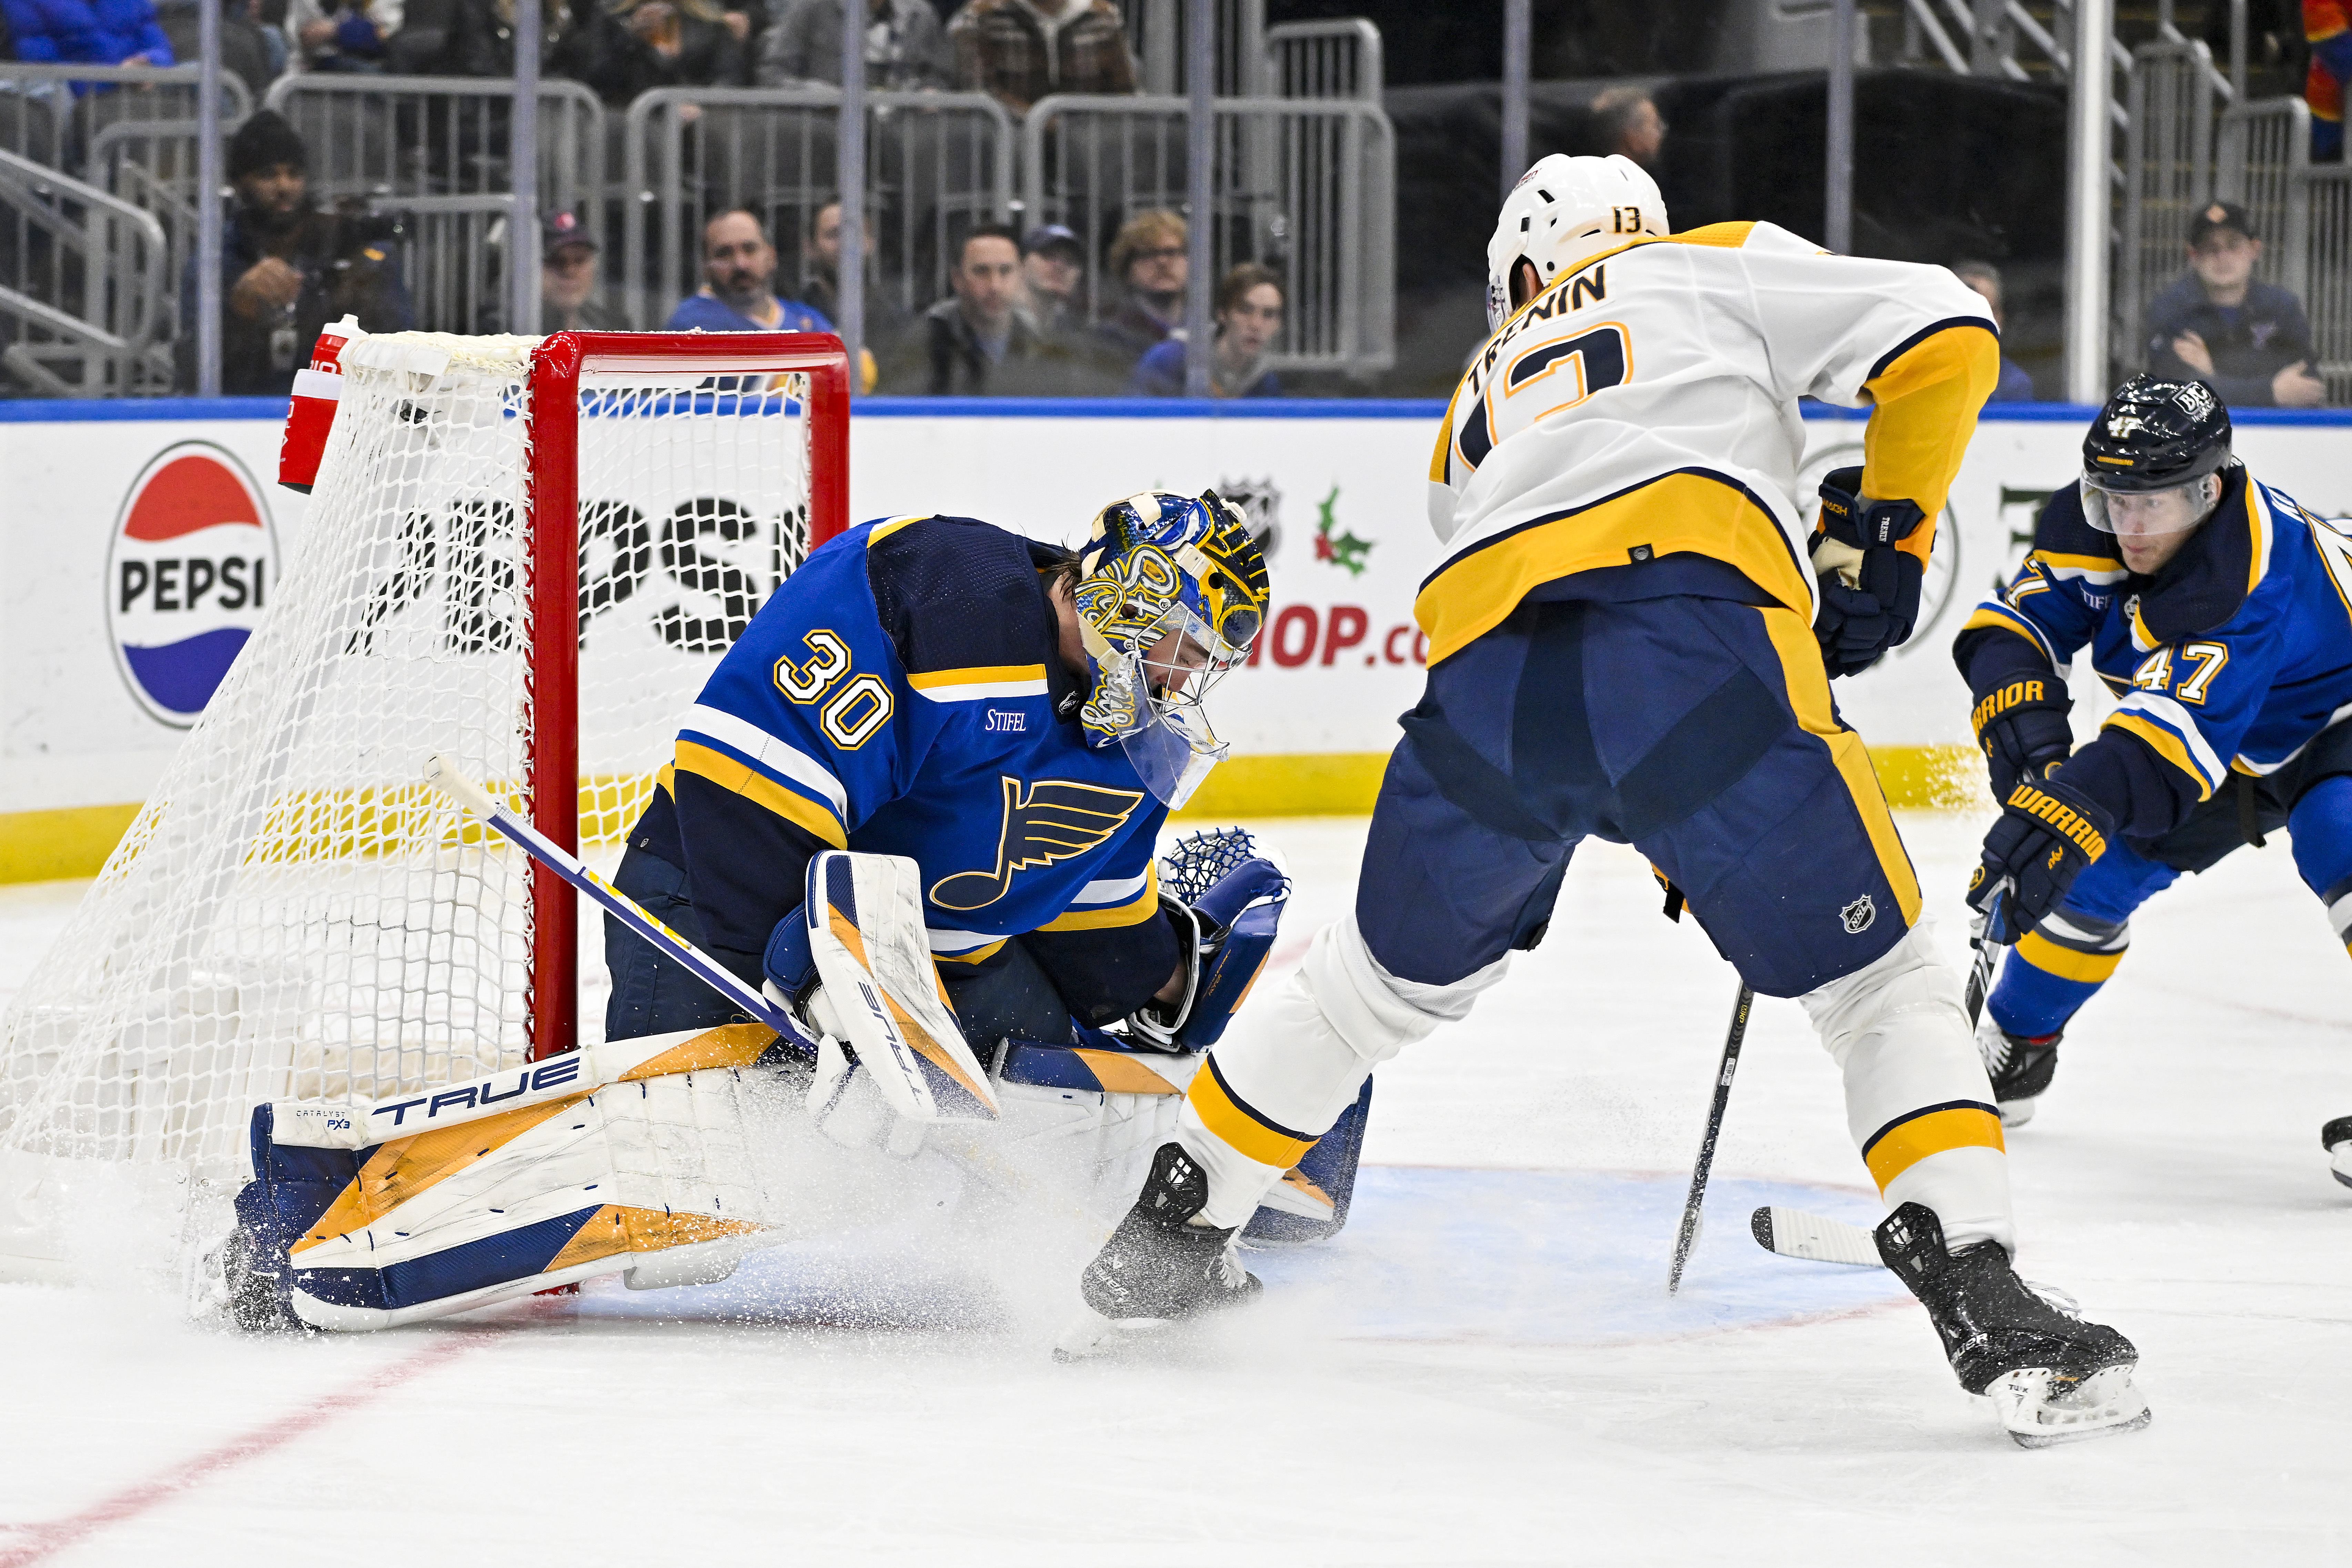 Predators extend win streak with 8-3 rout of Blues